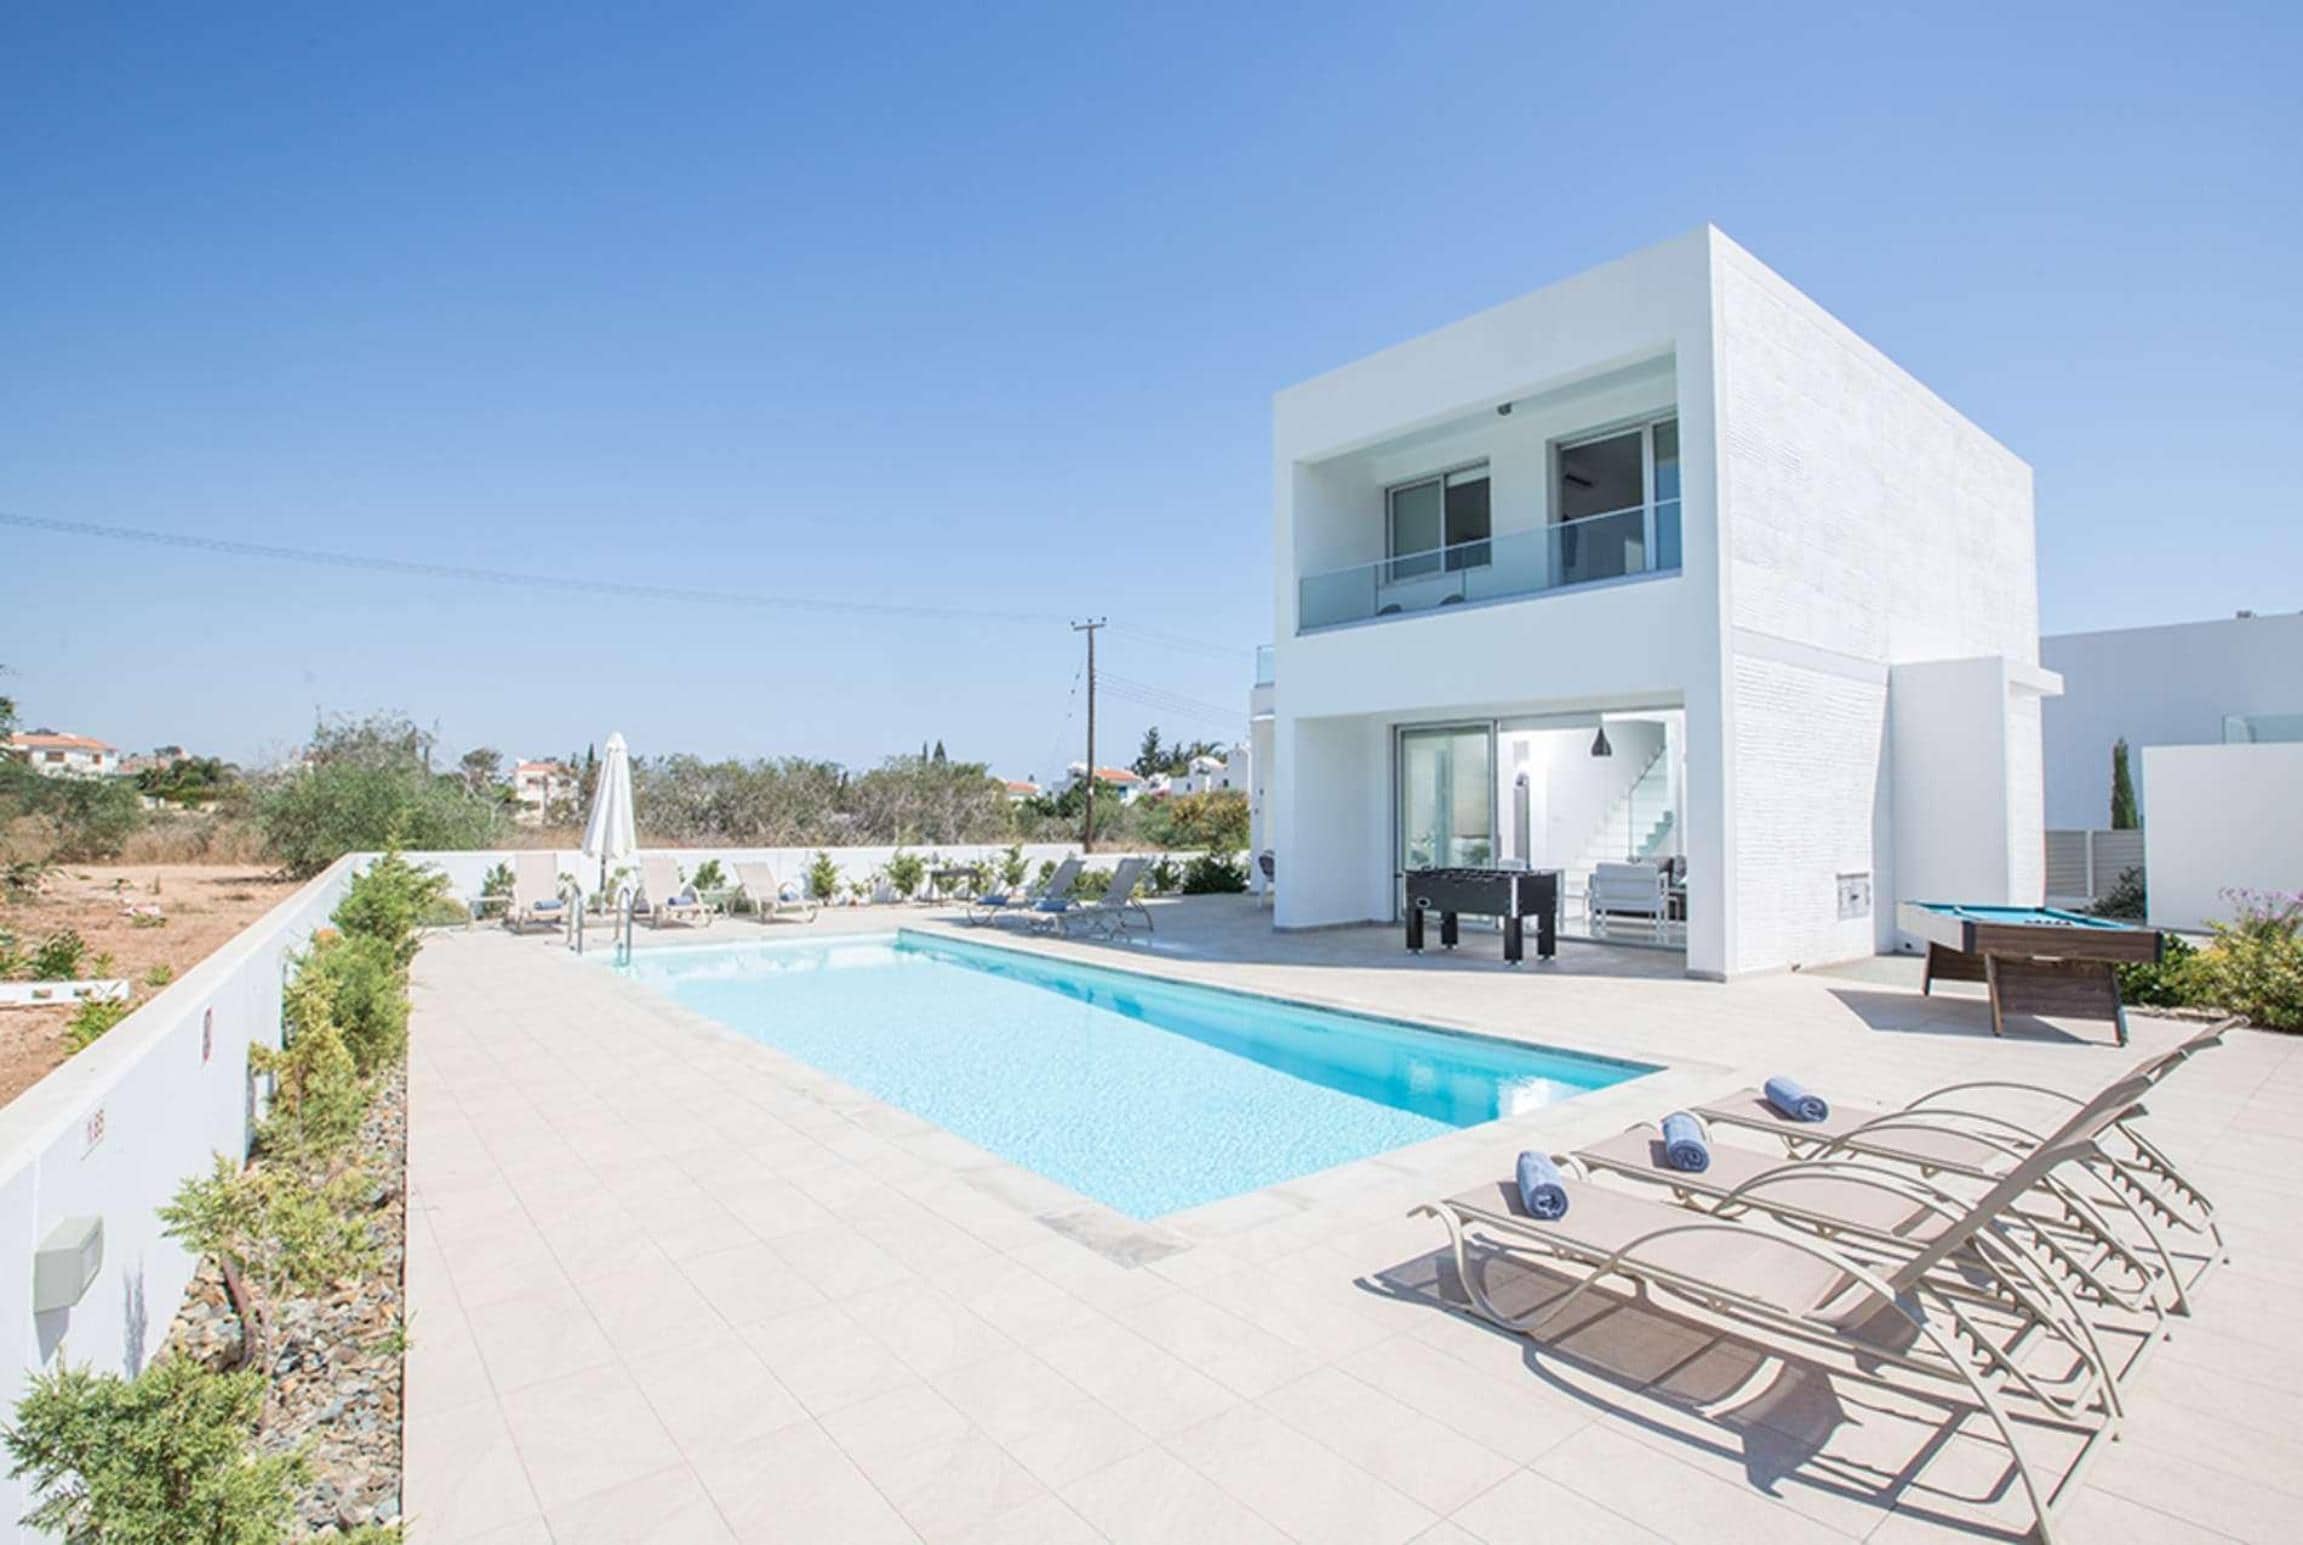 Property Image 1 - Lovely villa perfect for families, great location